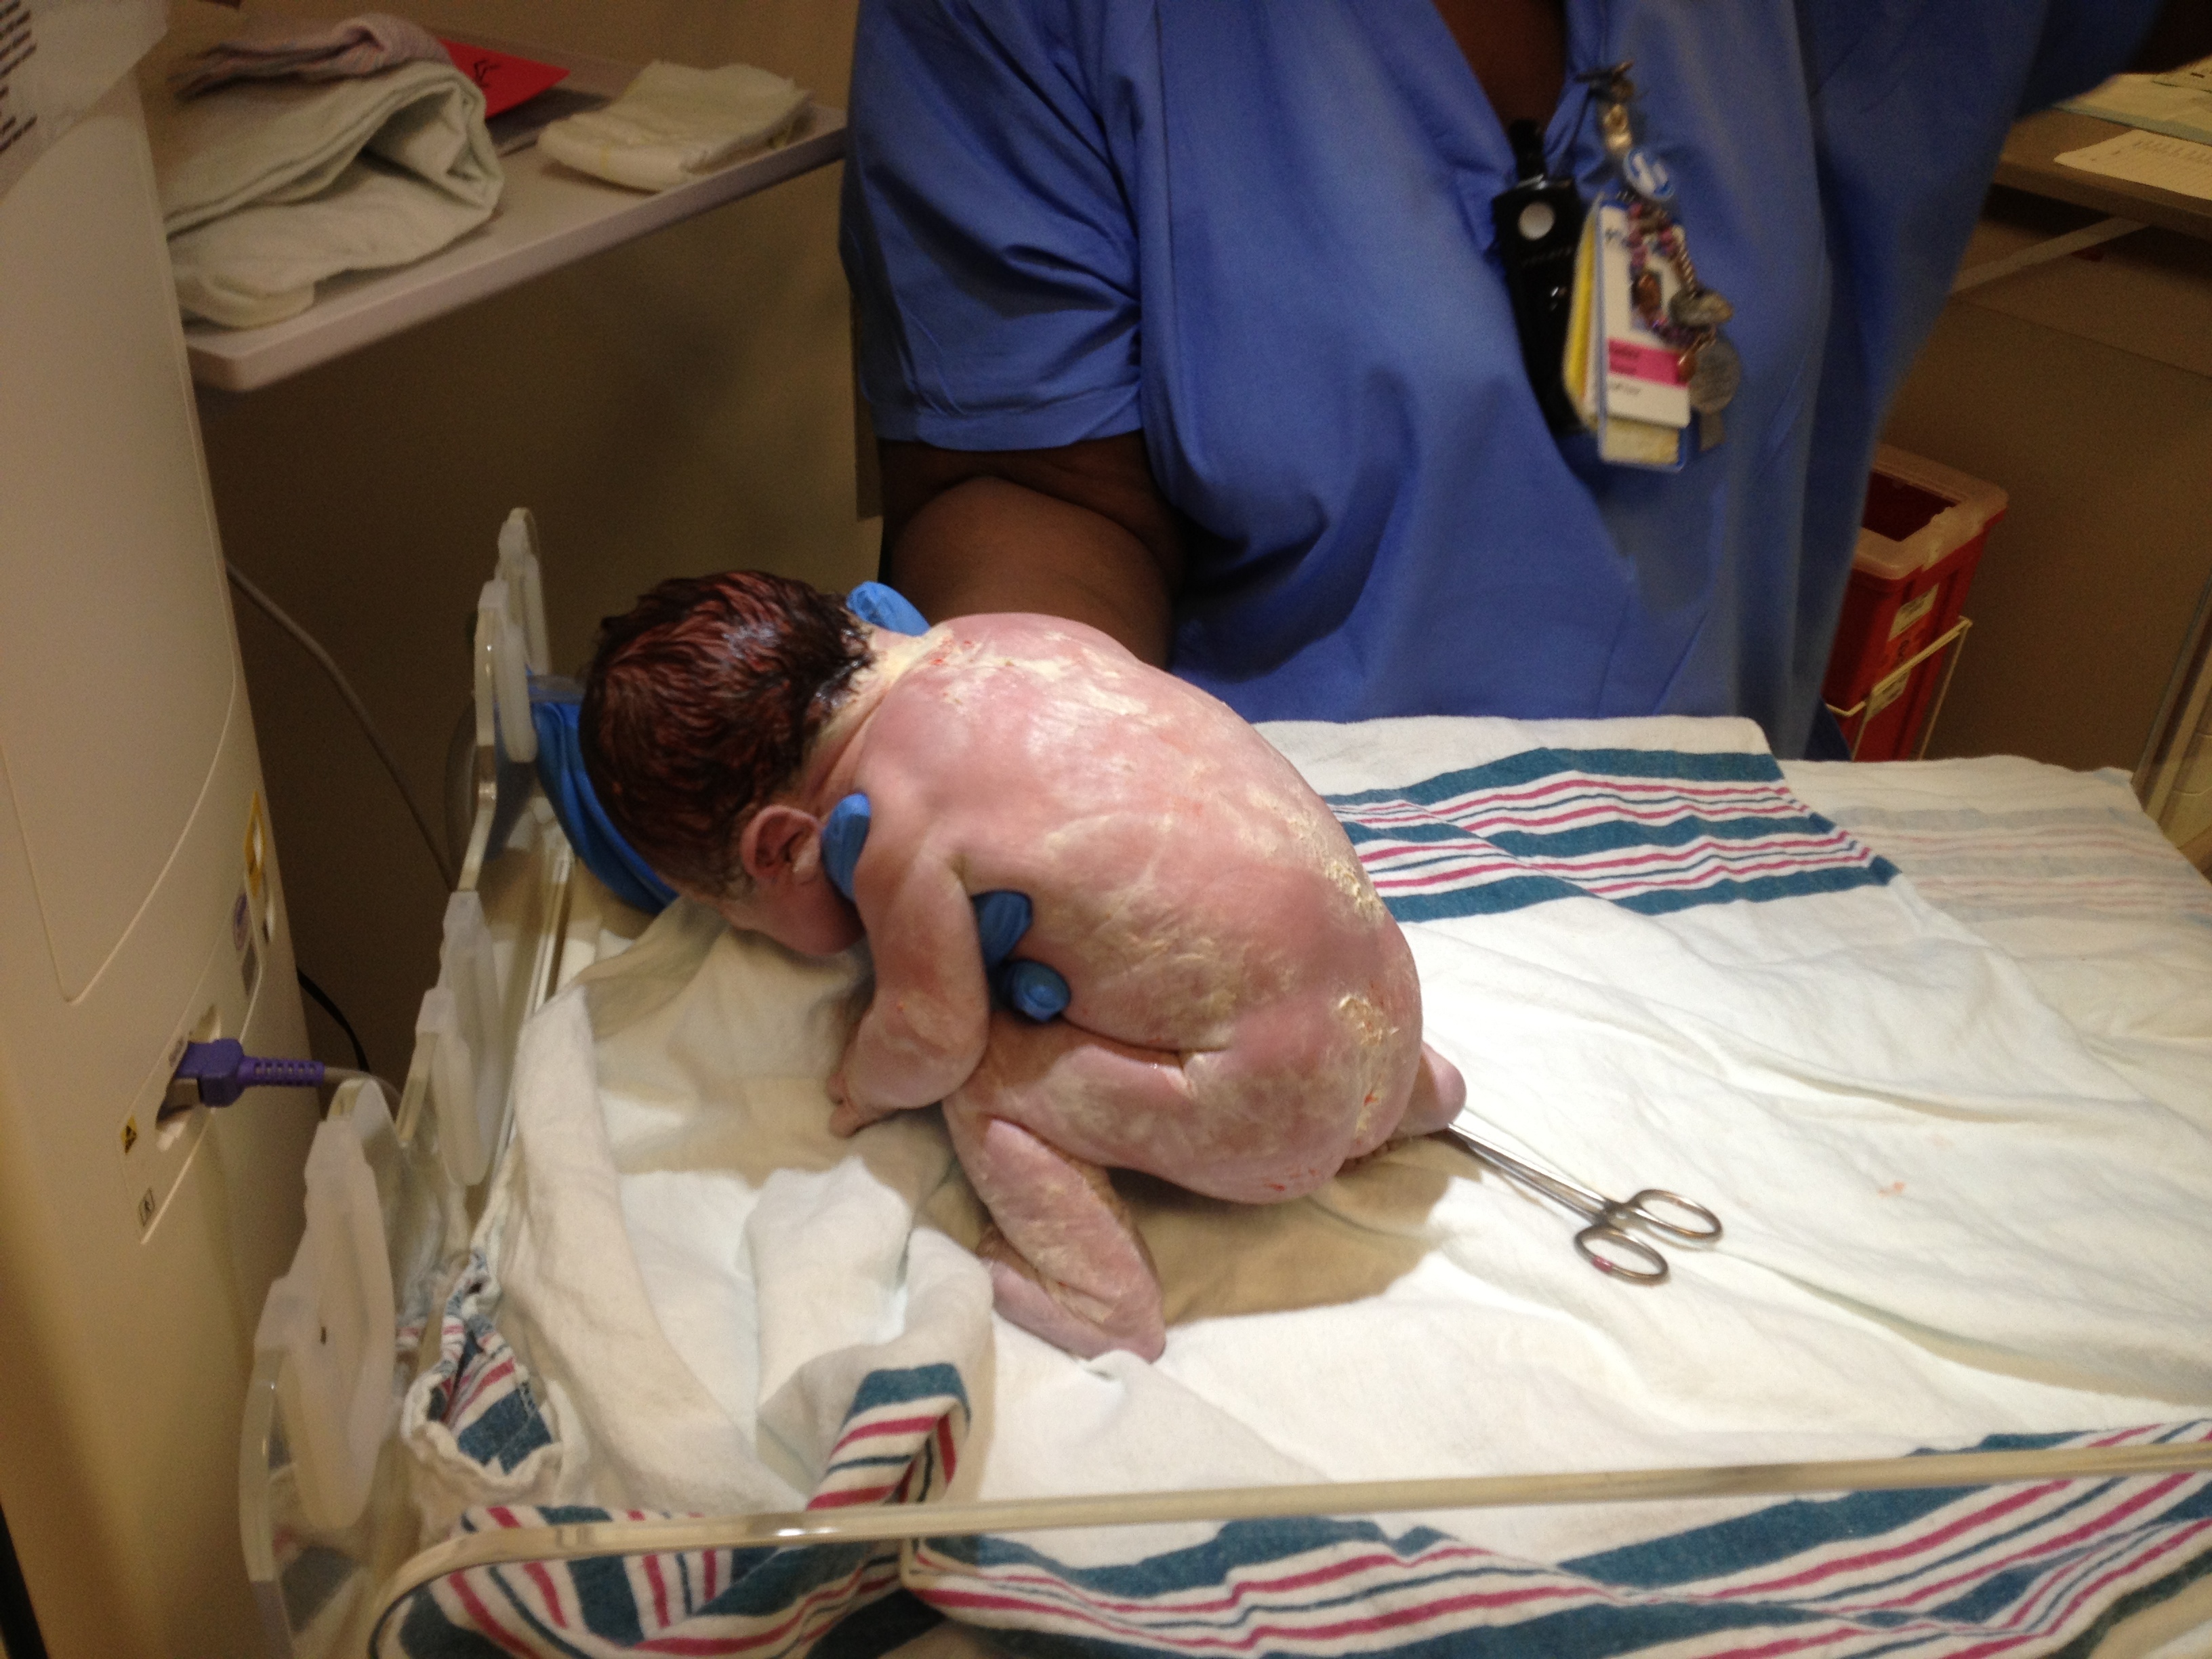 A newborn baby covered in vernix.^[[Image](https://www.flickr.com/photos/upsand/7377877798/in/photostream/) by [Upsilon Andromedae](https://www.flickr.com/photos/upsand/) is licensed under [CC BY 2.0](https://creativecommons.org/licenses/by/2.0/)]